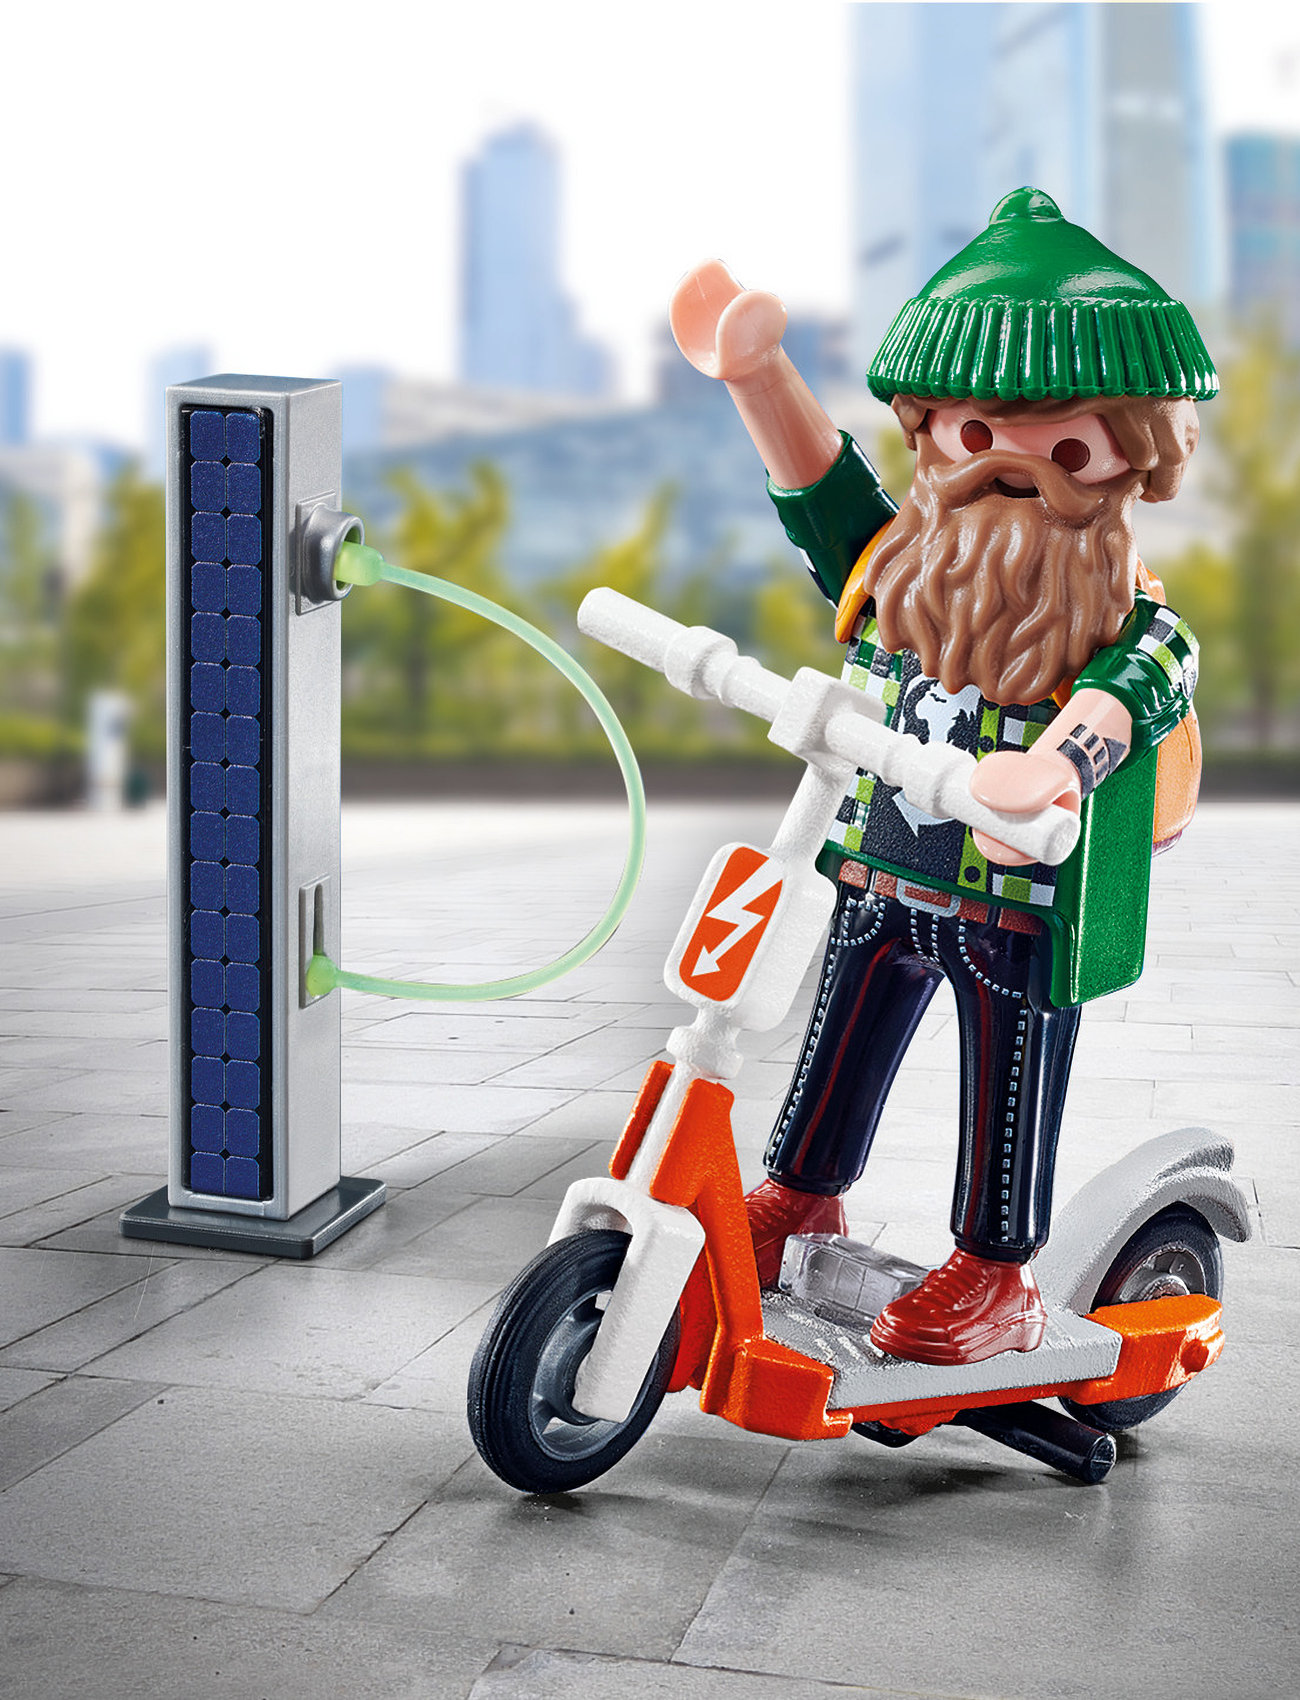 PLAYMOBIL - PLAYMOBIL Special Plus Hipster med el-scooter - 70873 - playmobil special plus - multicolored - 1